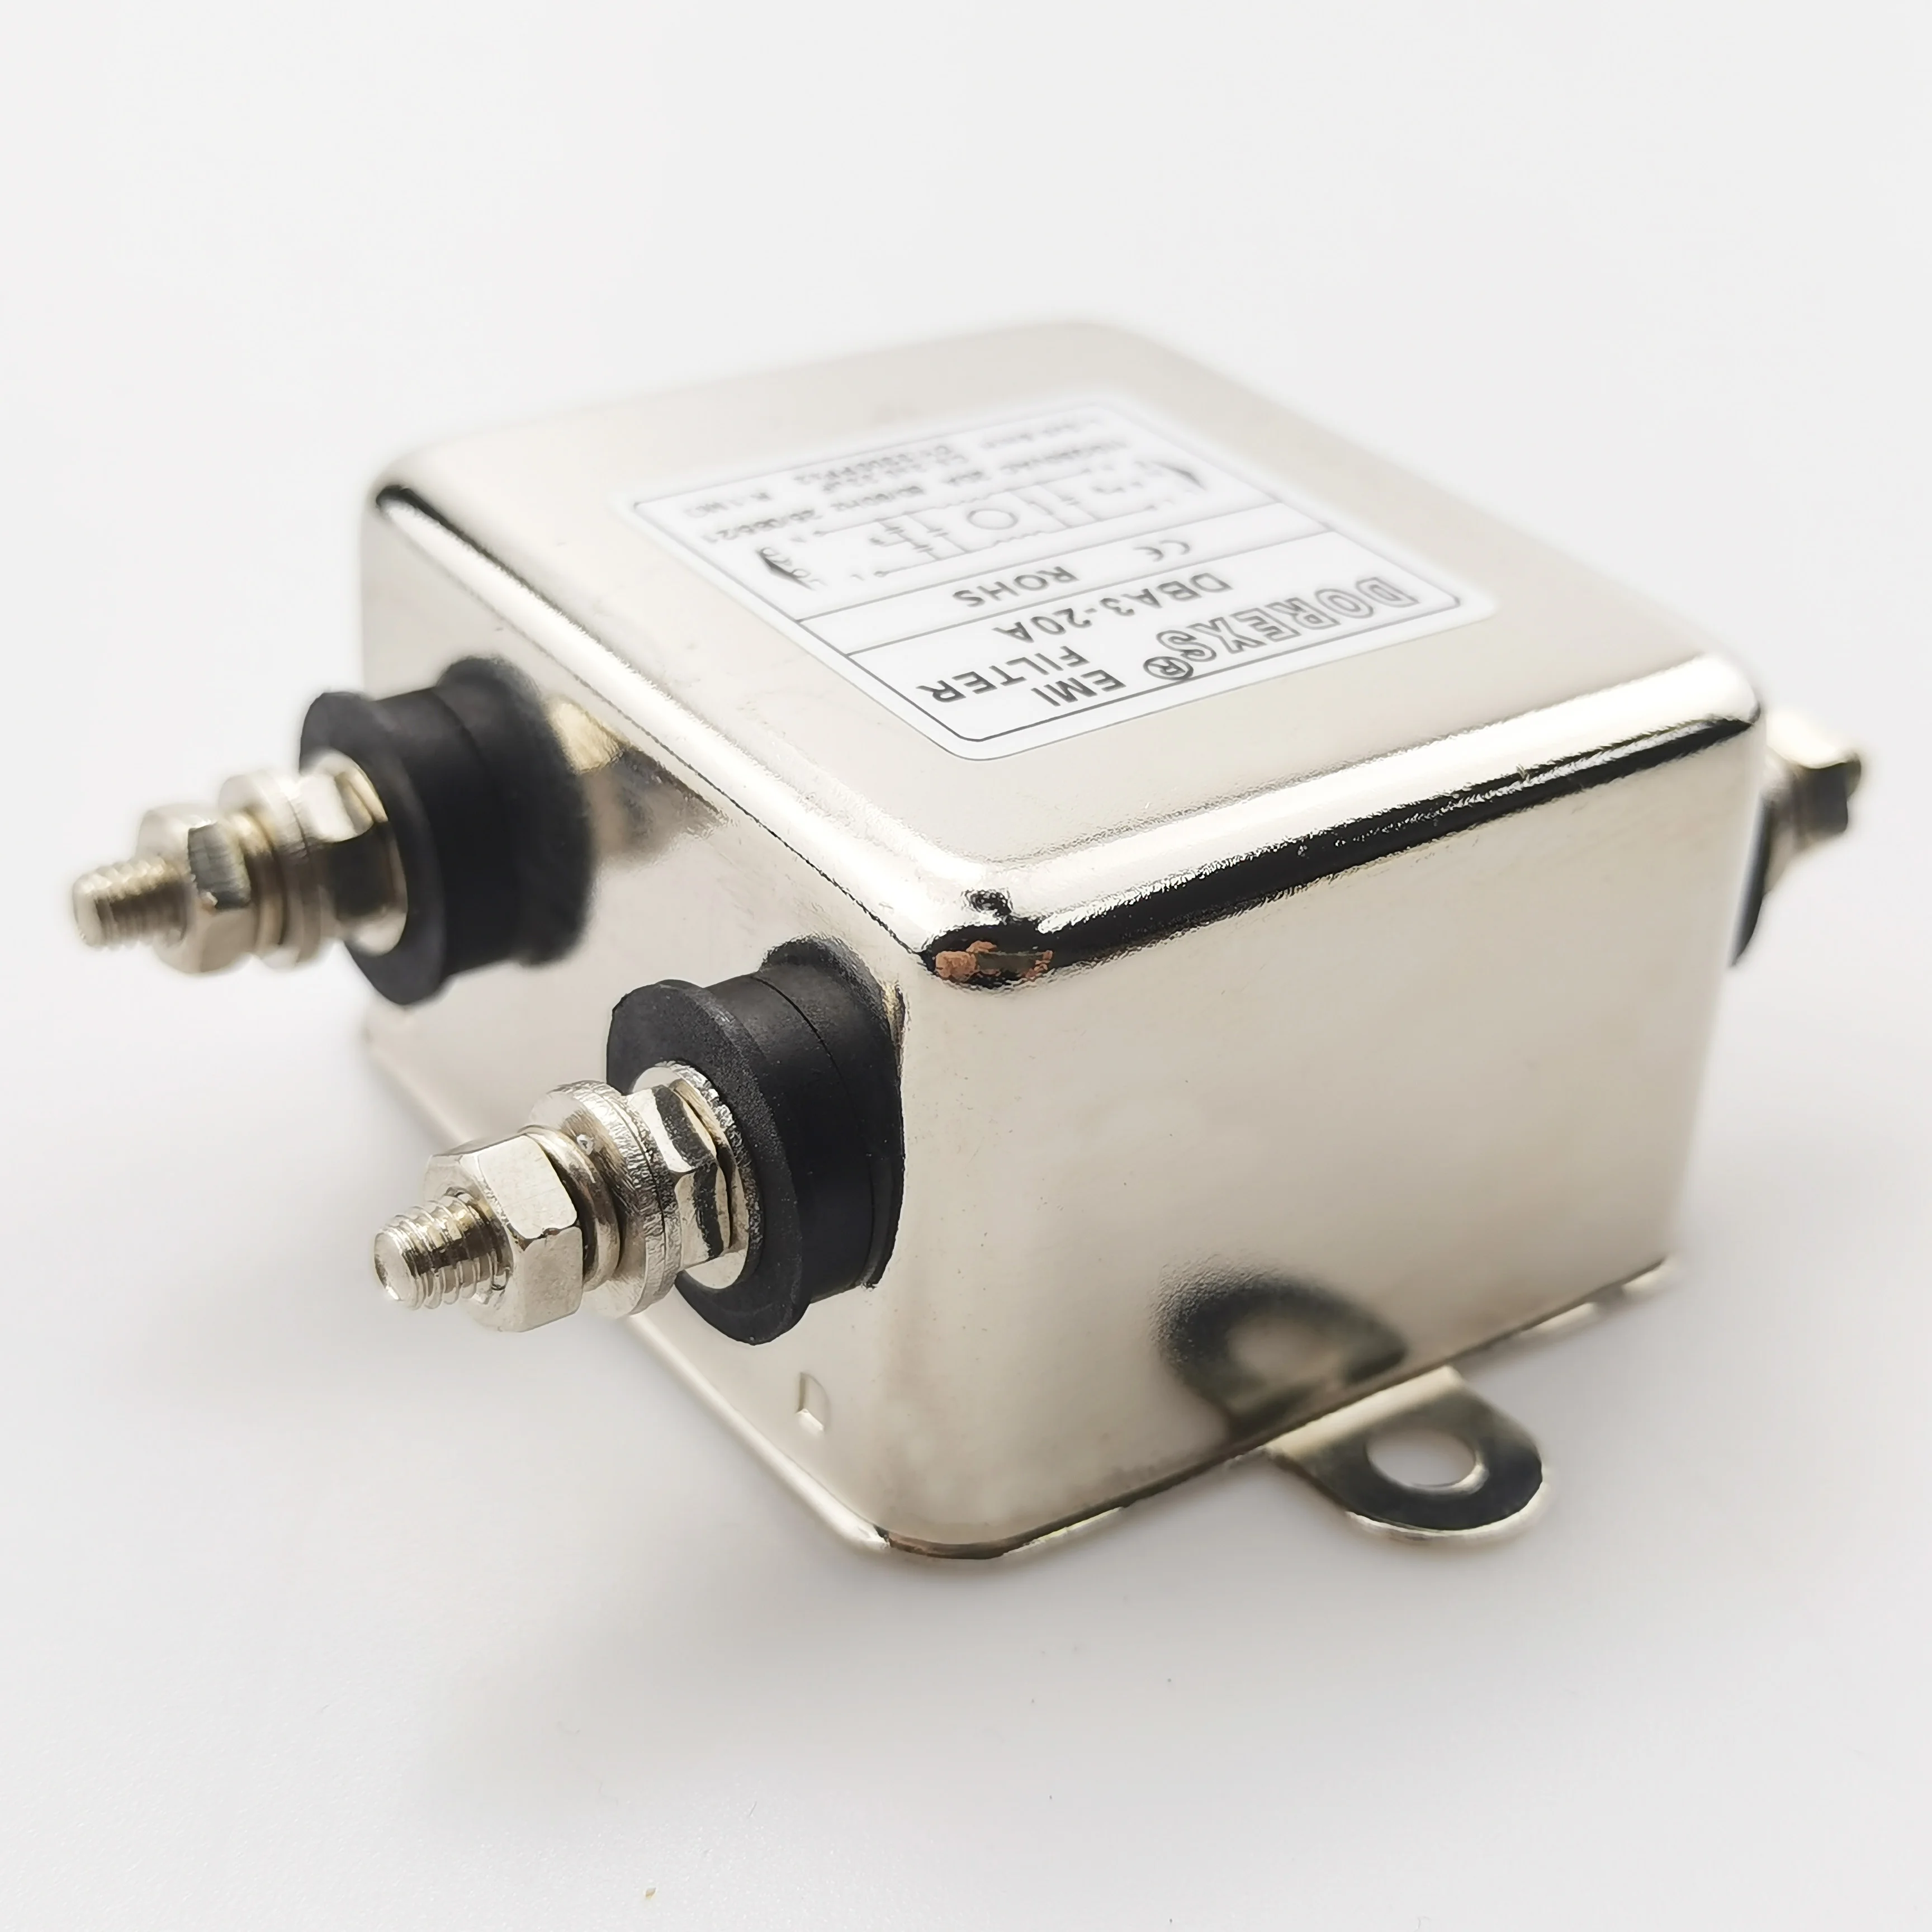 220 V EMI single phase general dba3 series power line noise filter, rated current 1a, 3a, 6a, 10a, 20A